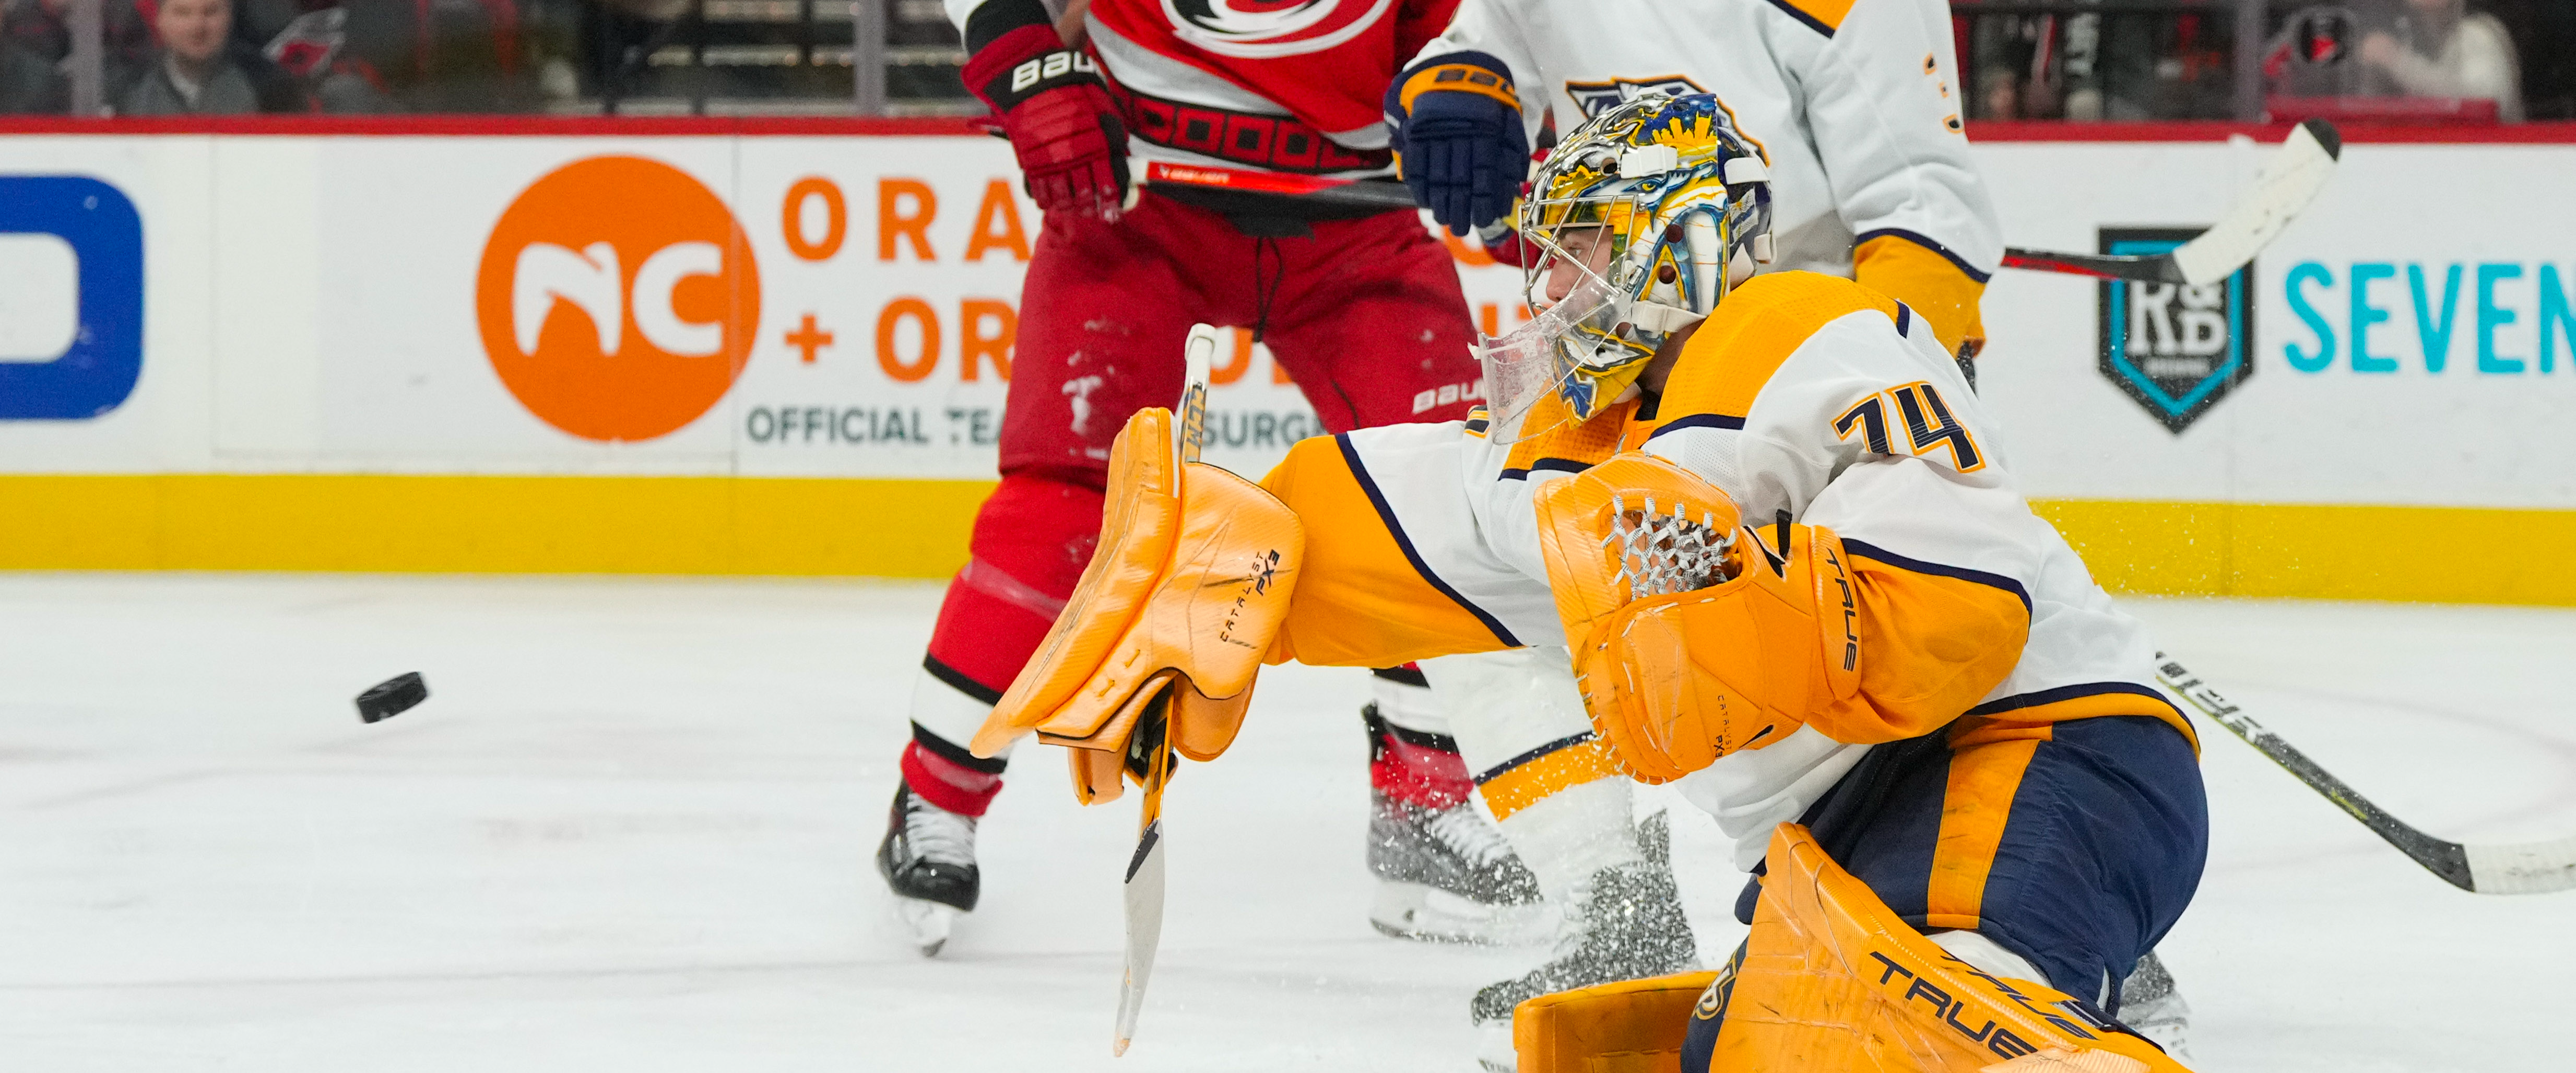 Predators: A record-breaking night from Juuse Saros only highlights bigger issues